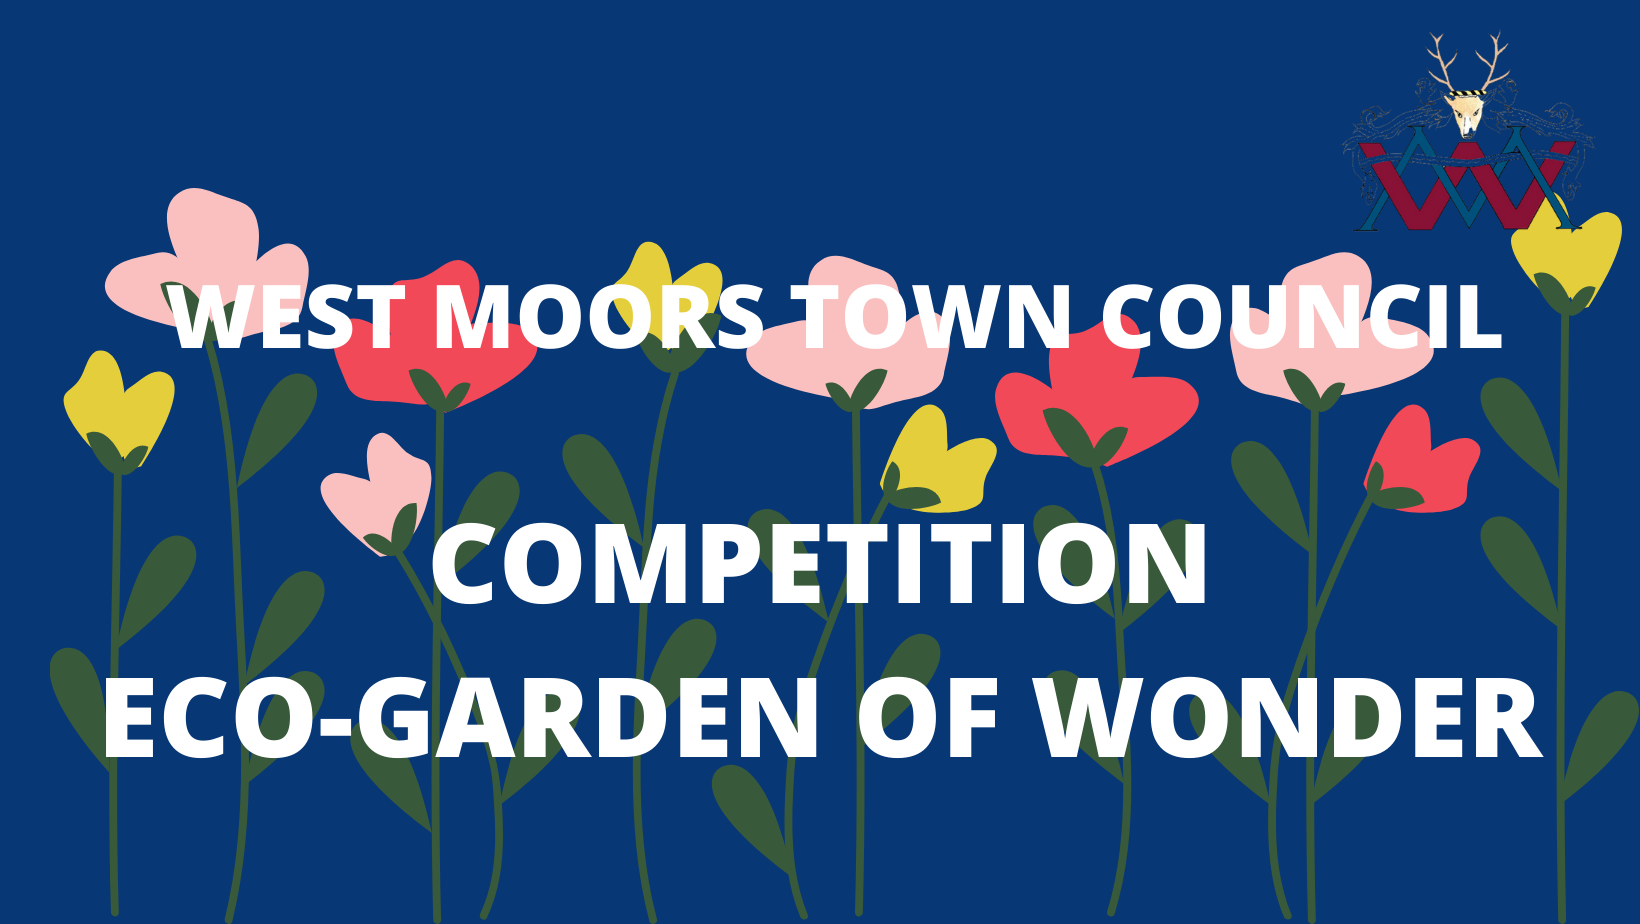 West Moors Eco-Garden of Wonder Competition